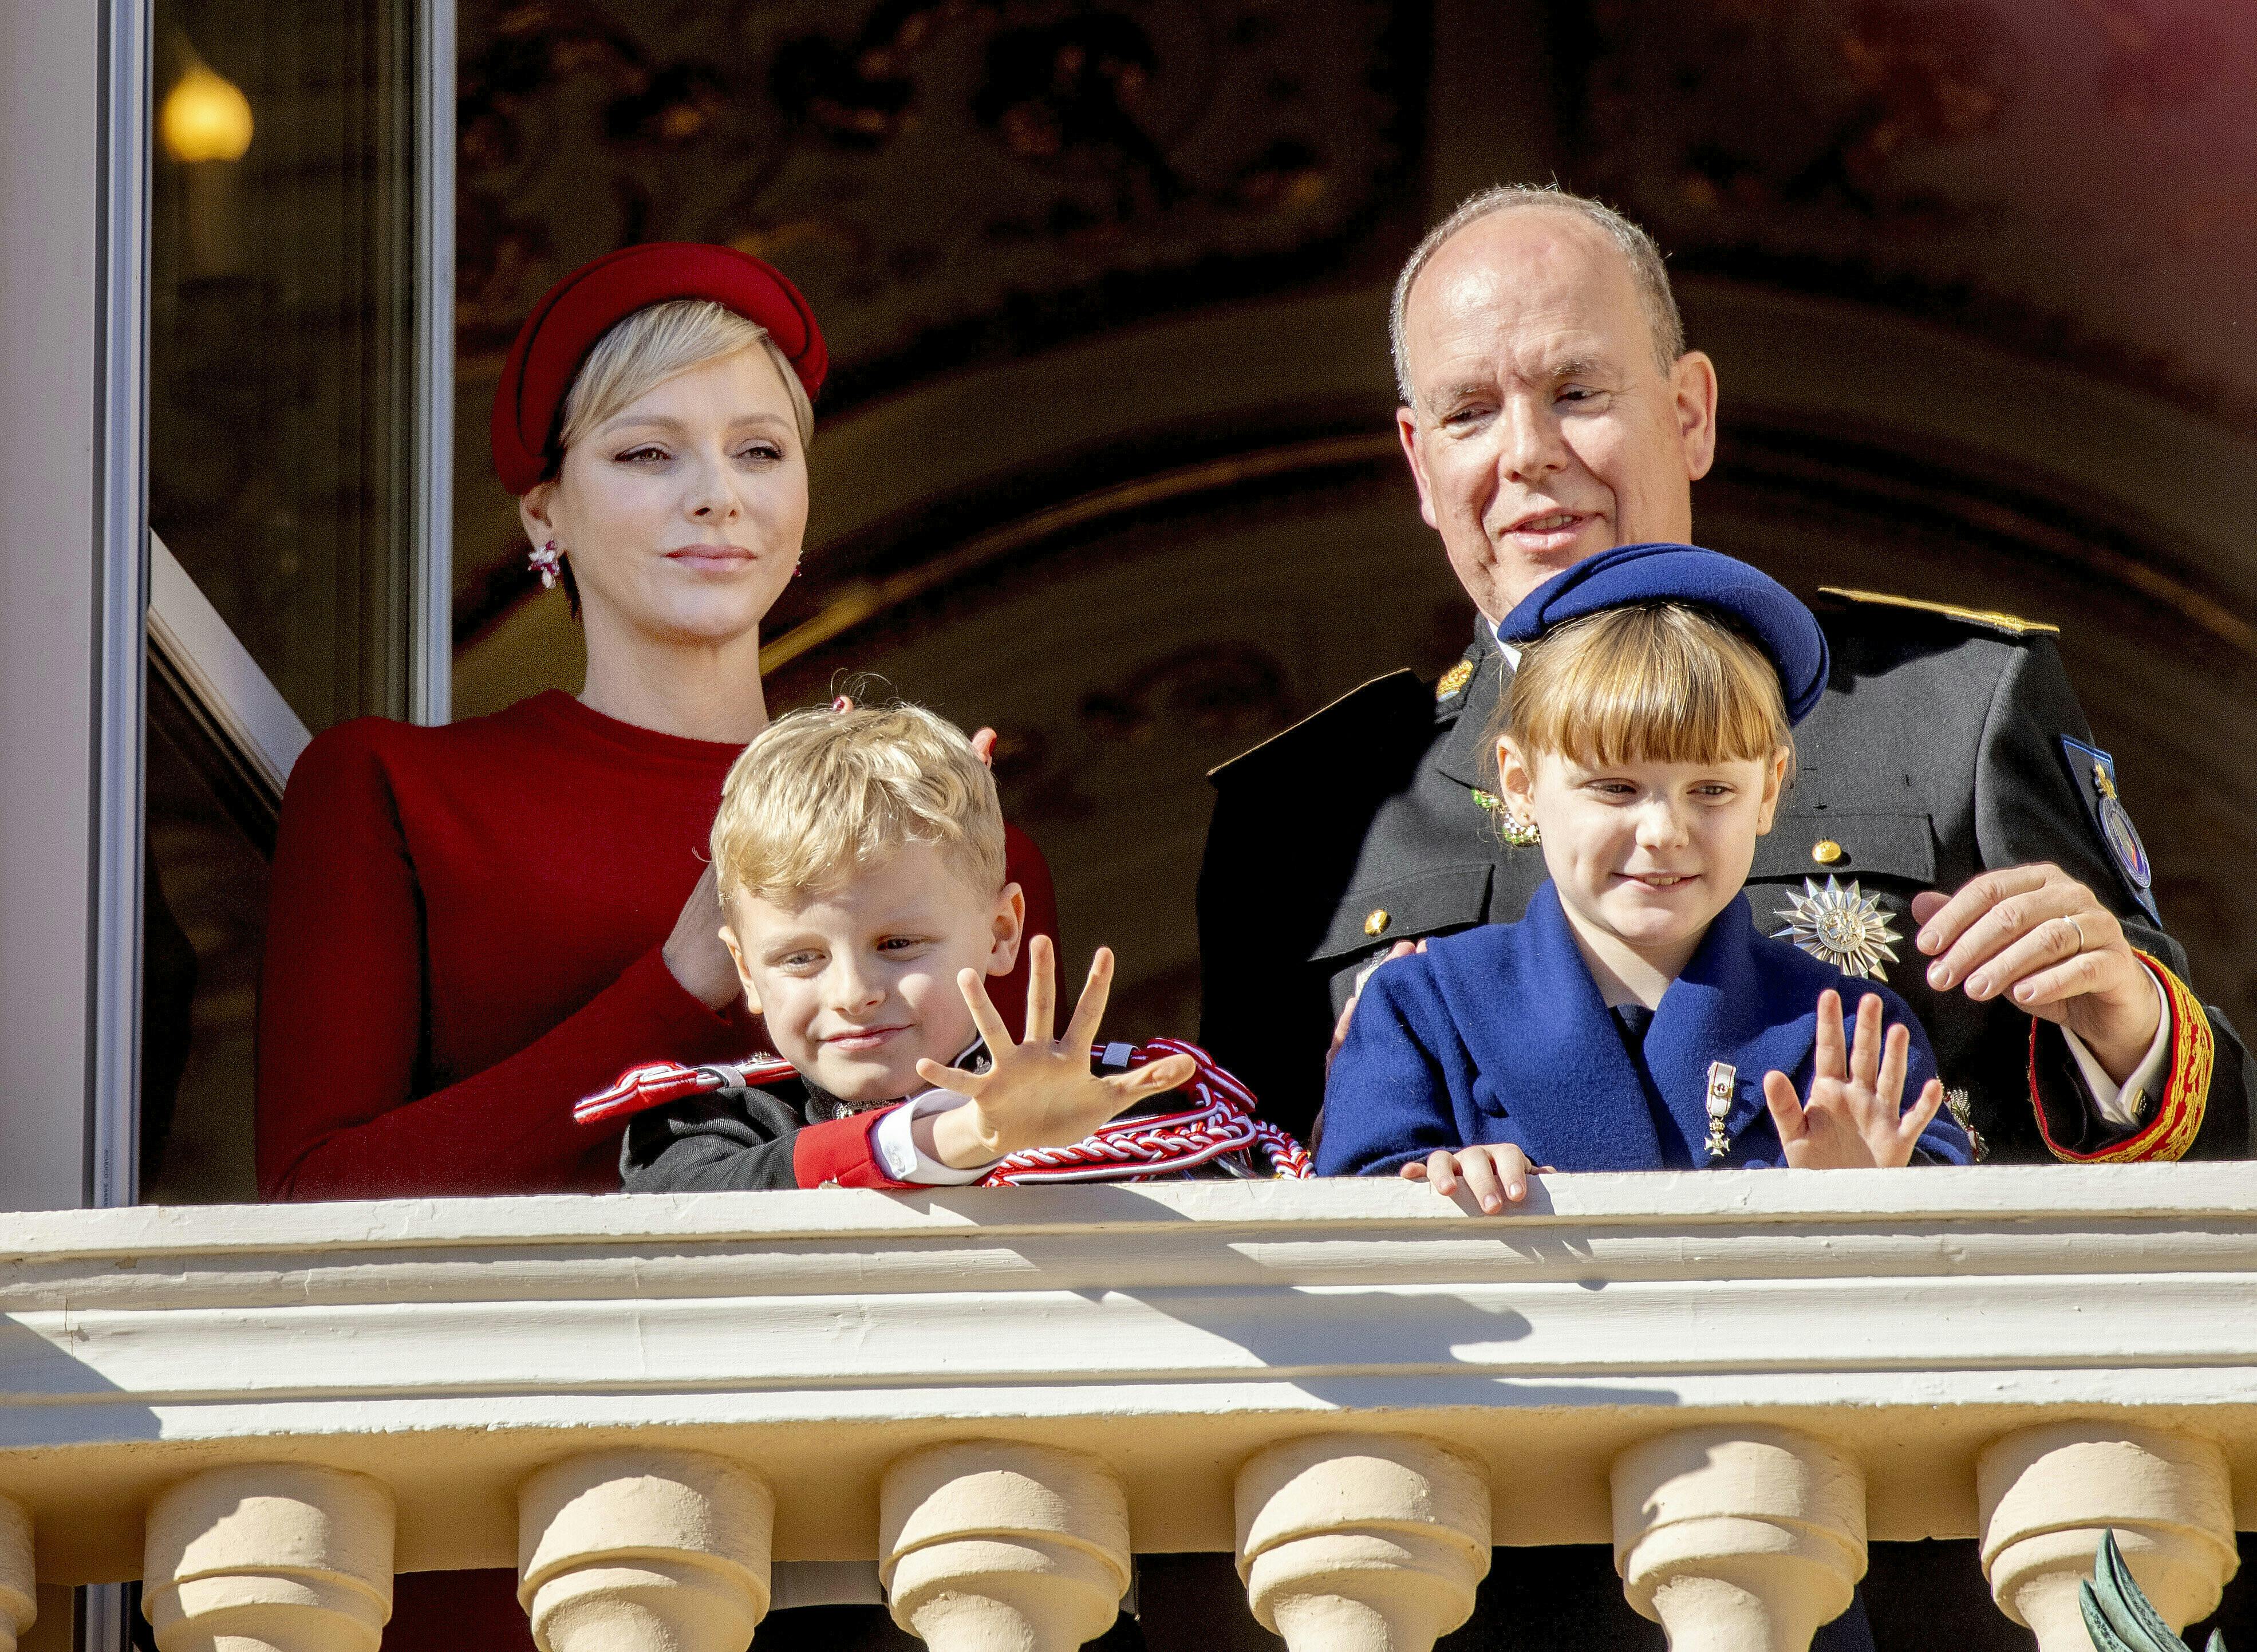 Princess Caroline of Hanover, Andrea Casiraghi and Charlotte Casiraghi of Monaco on the balcony of the Princely Palace in Monaco-Ville, on November 19, 2023, during the Monaco national day celebrations Photo by: Albert Nieboer/picture-alliance/dpa/AP Images